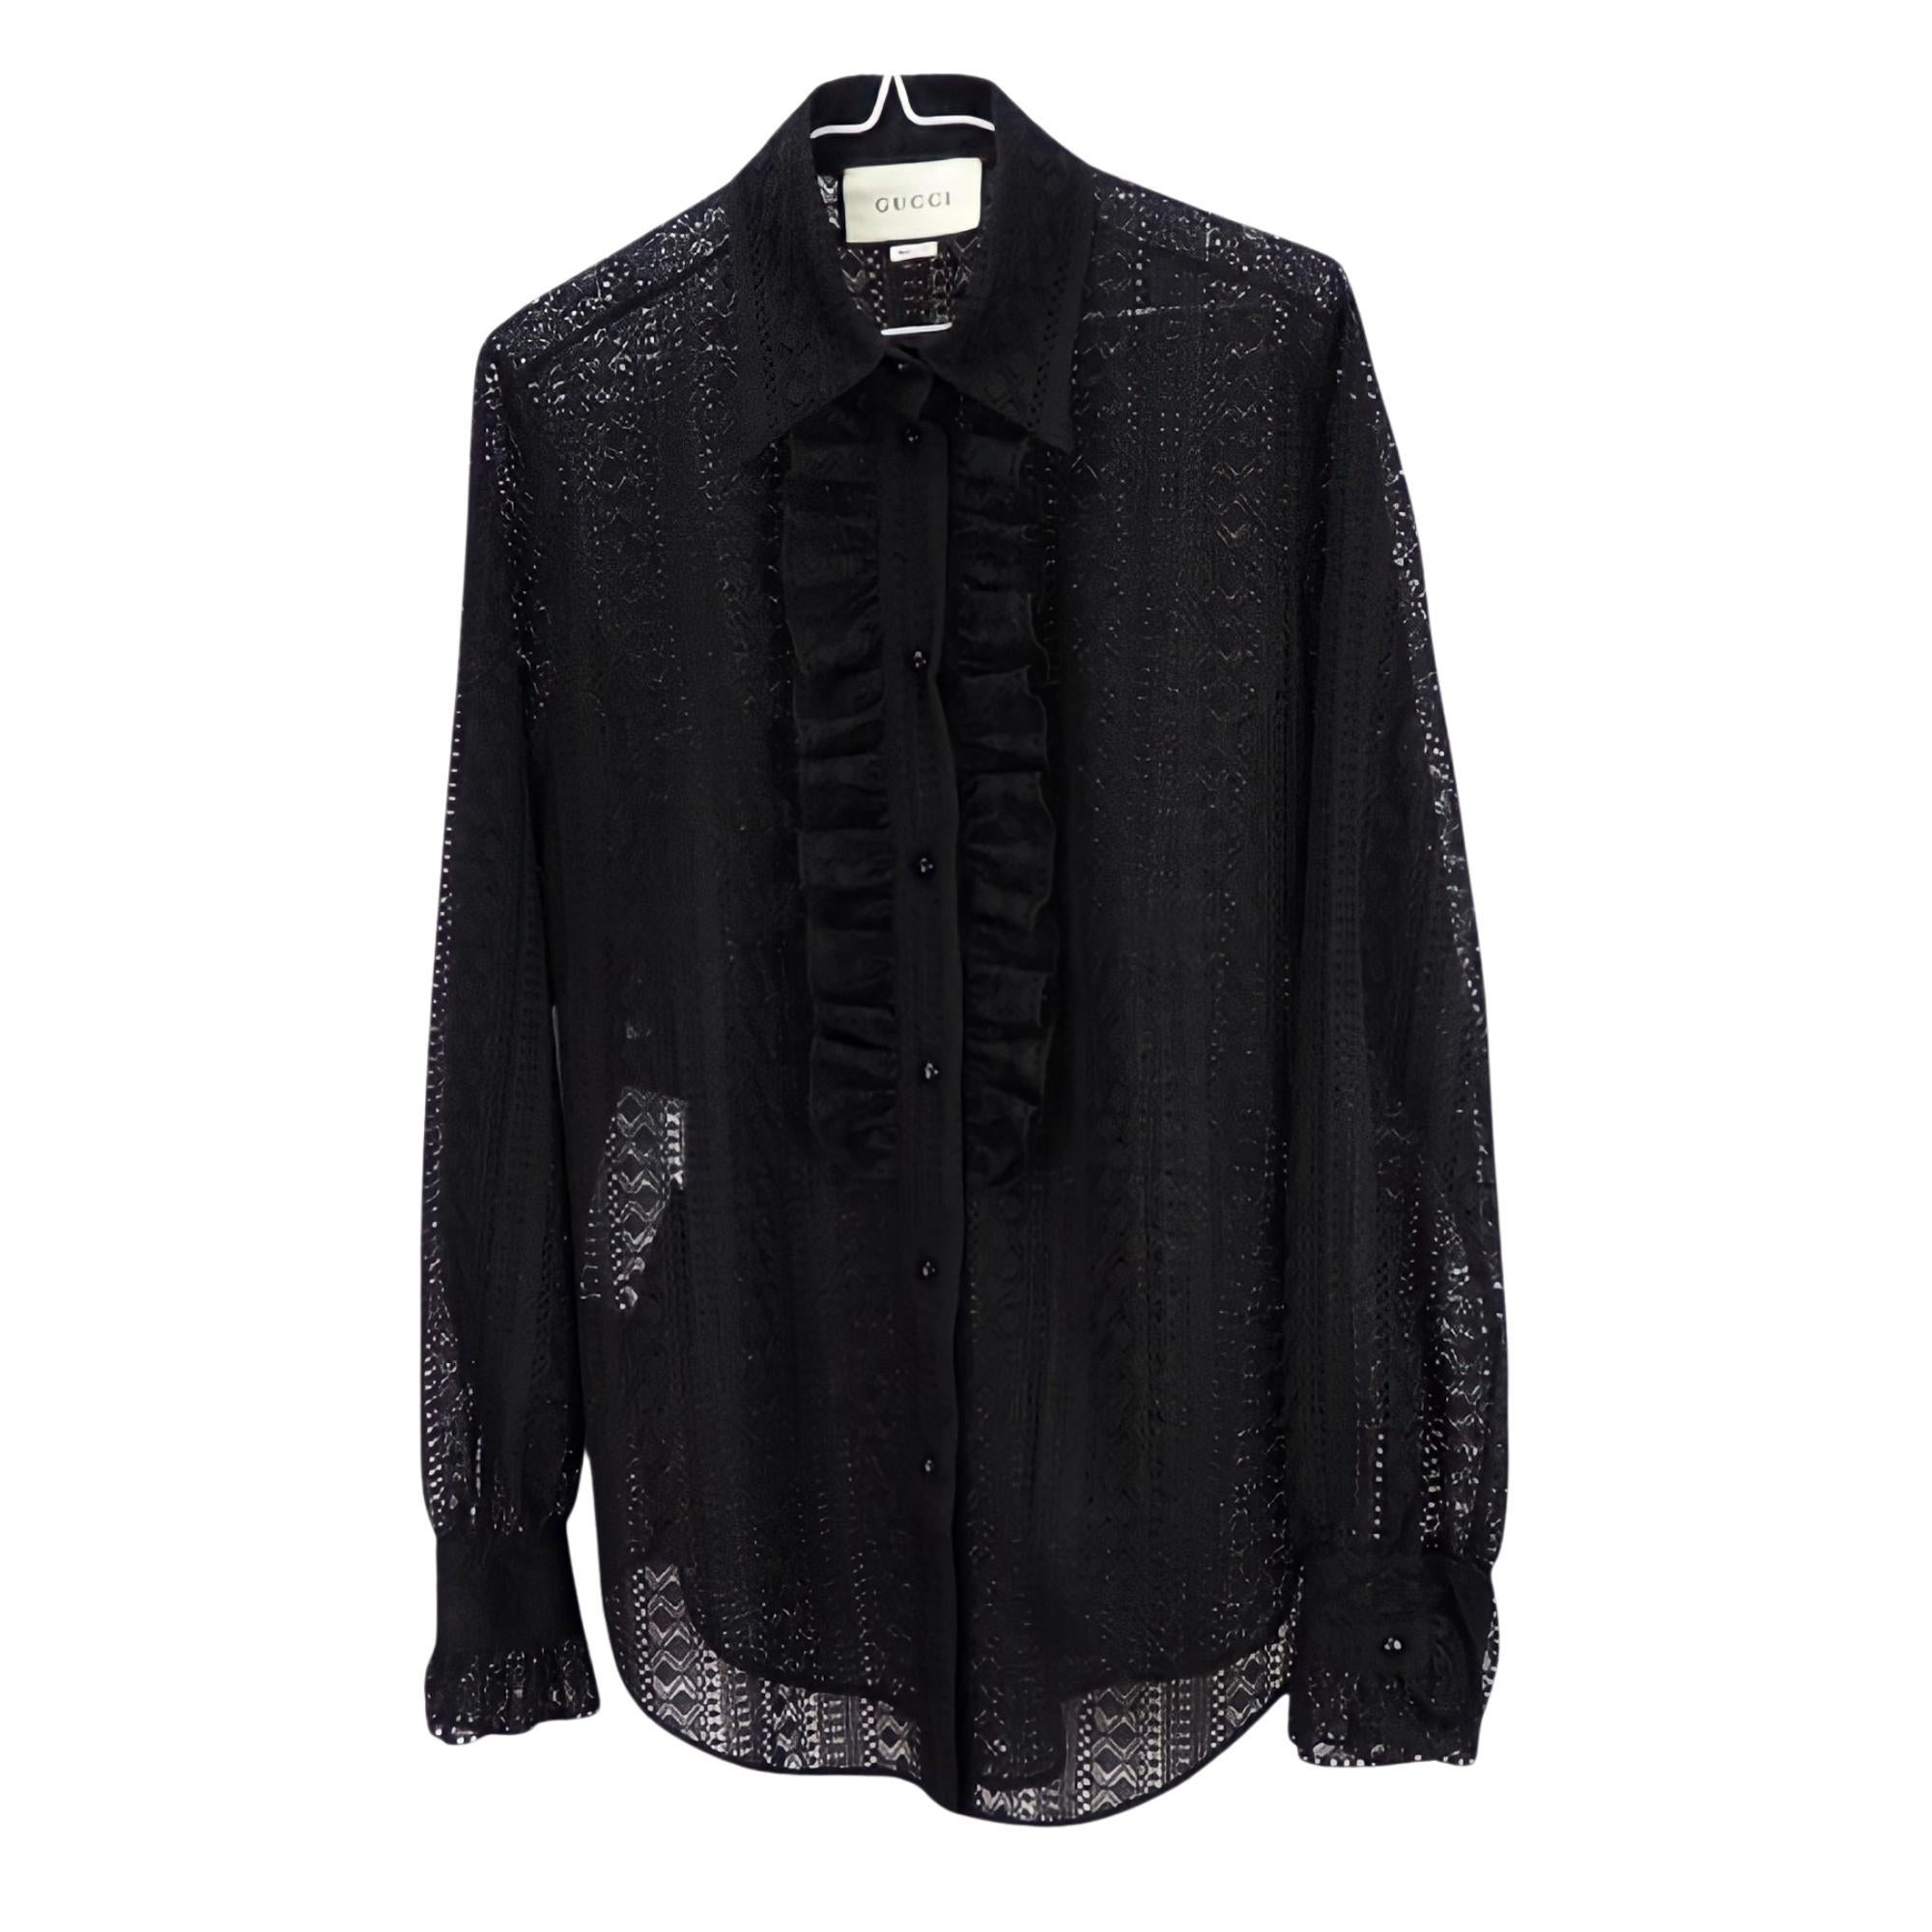 Gucci Black Ruffle Striped Laced Button Up Ls Shirt (M) 572339 In Excellent Condition For Sale In Montreal, Quebec